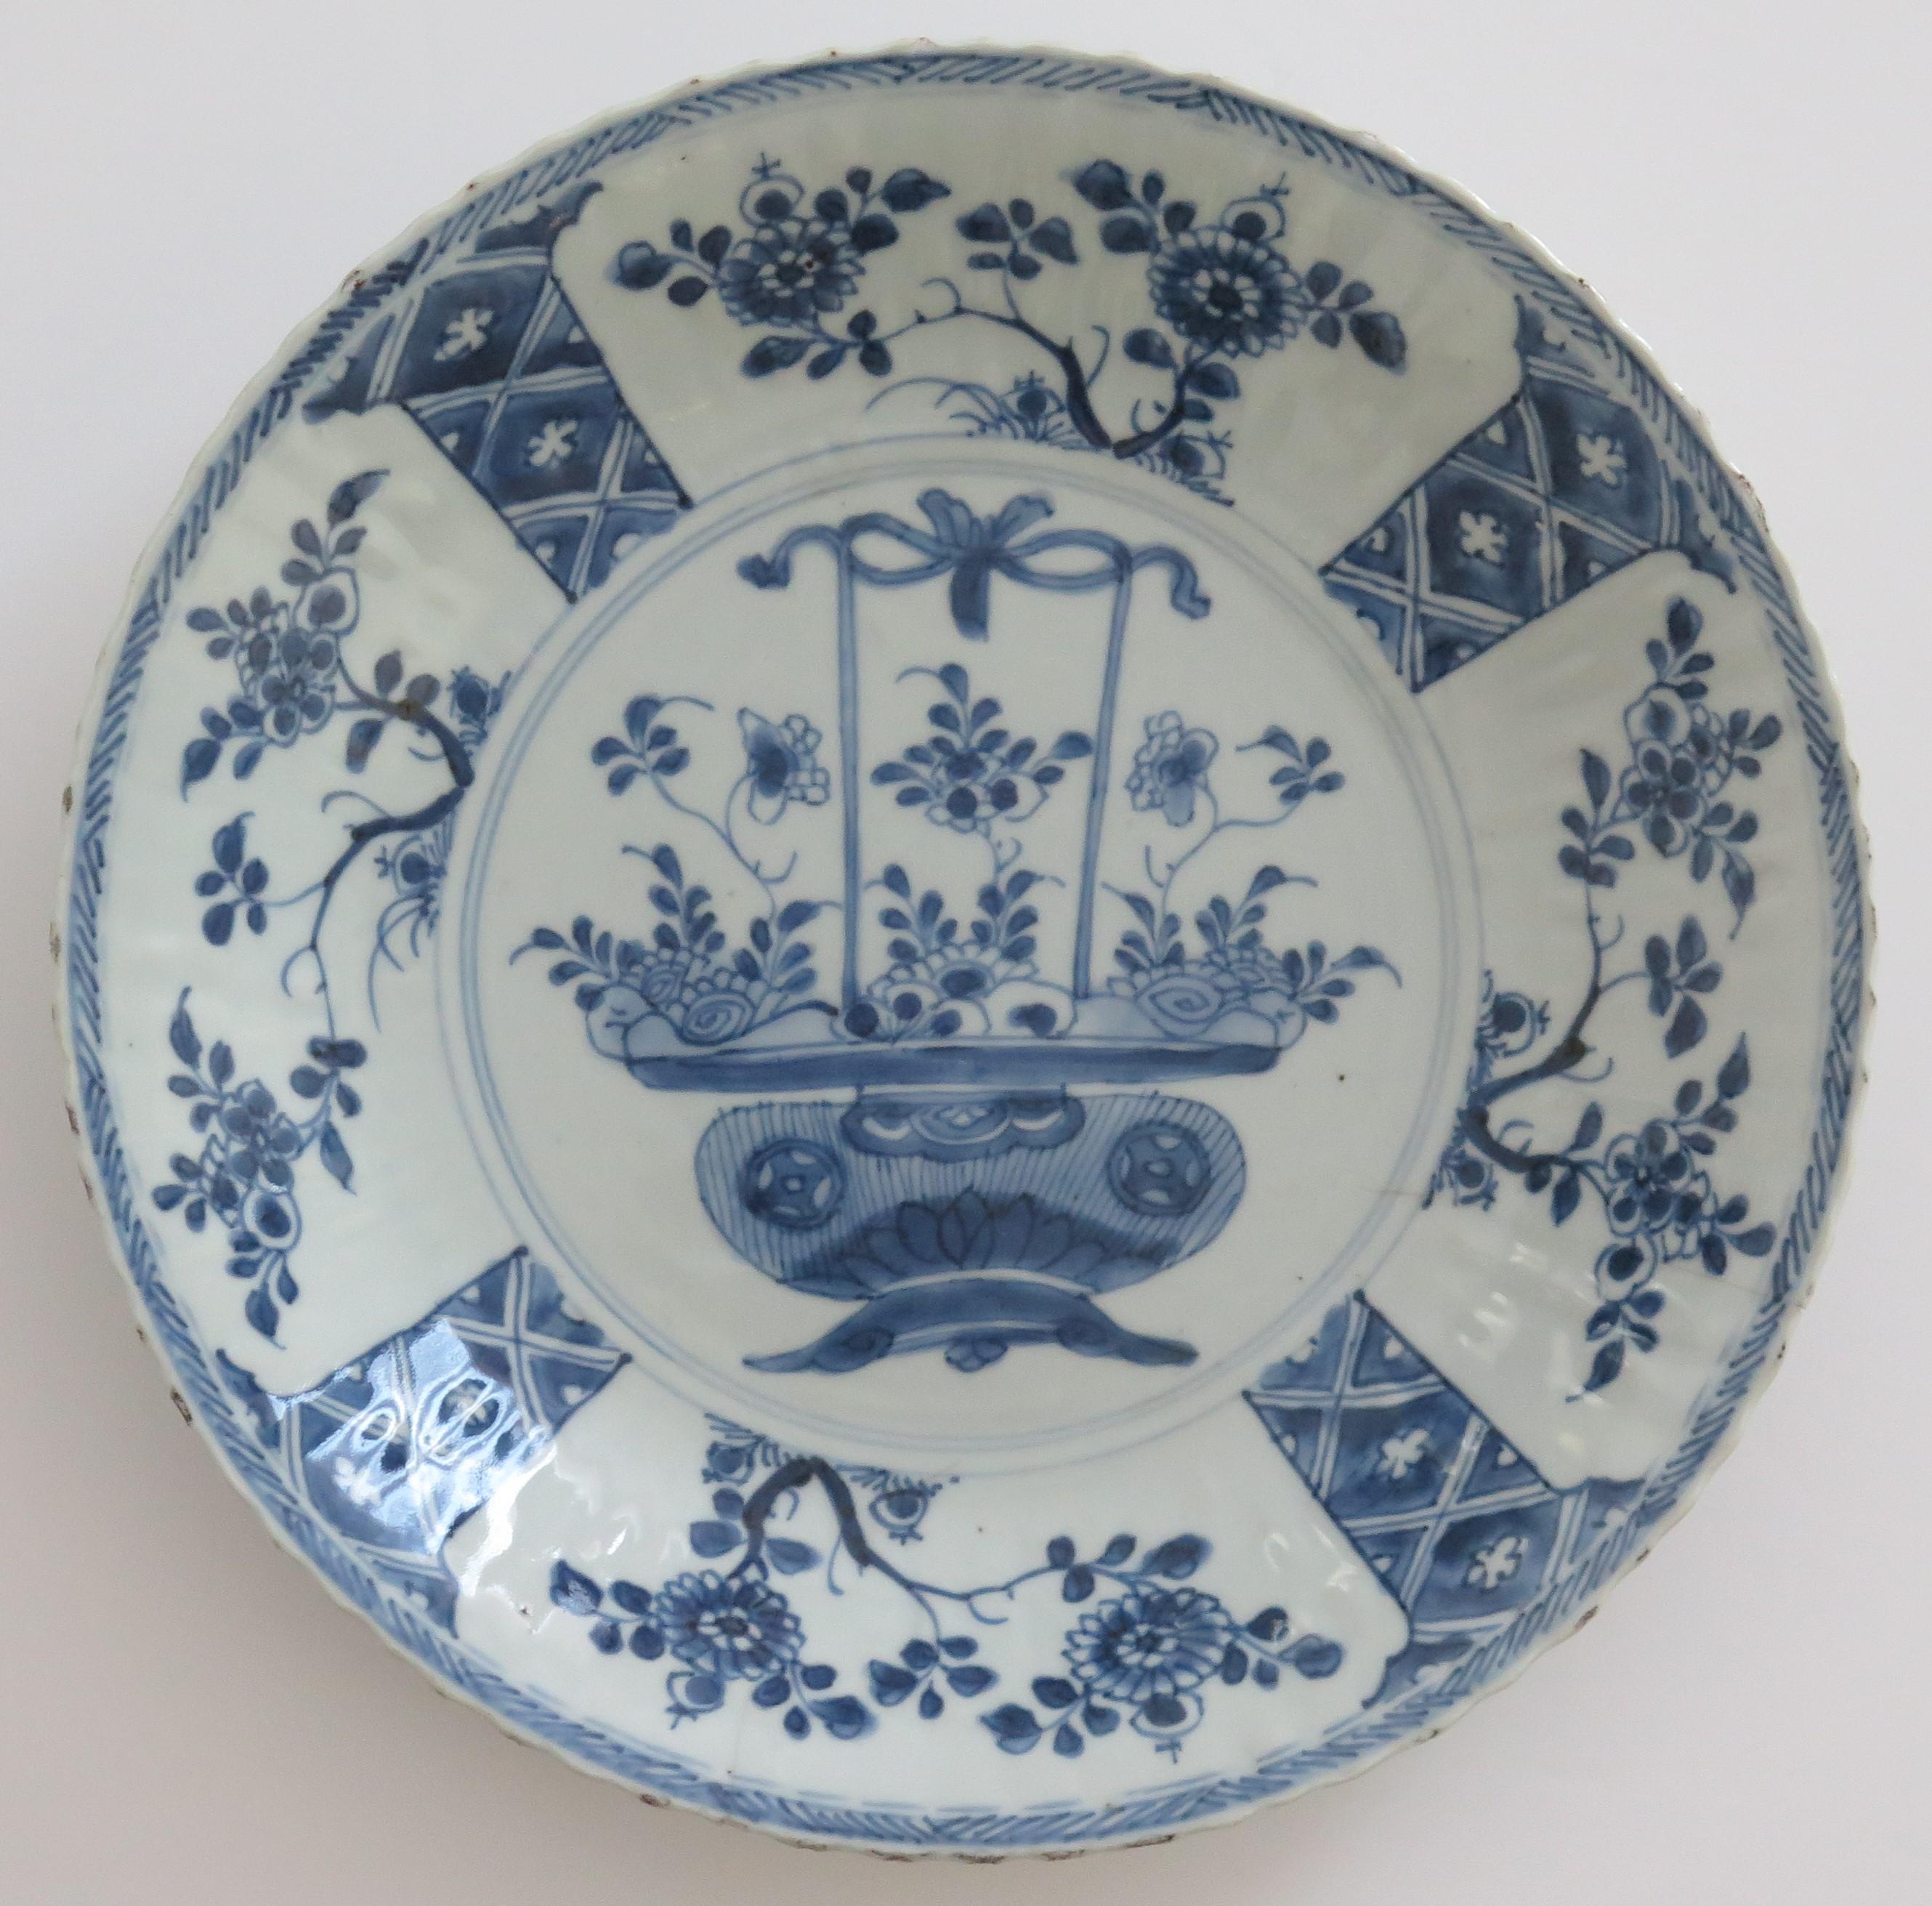 This is a beautifully hand-painted Chinese Export porcelain blue and white, large deep plate or dish which we date to the Qing, early 18th Century, Yongzheng period, Circa 1730.

The plate is finely potted with a ribbed cavetto and frilled rim edge,